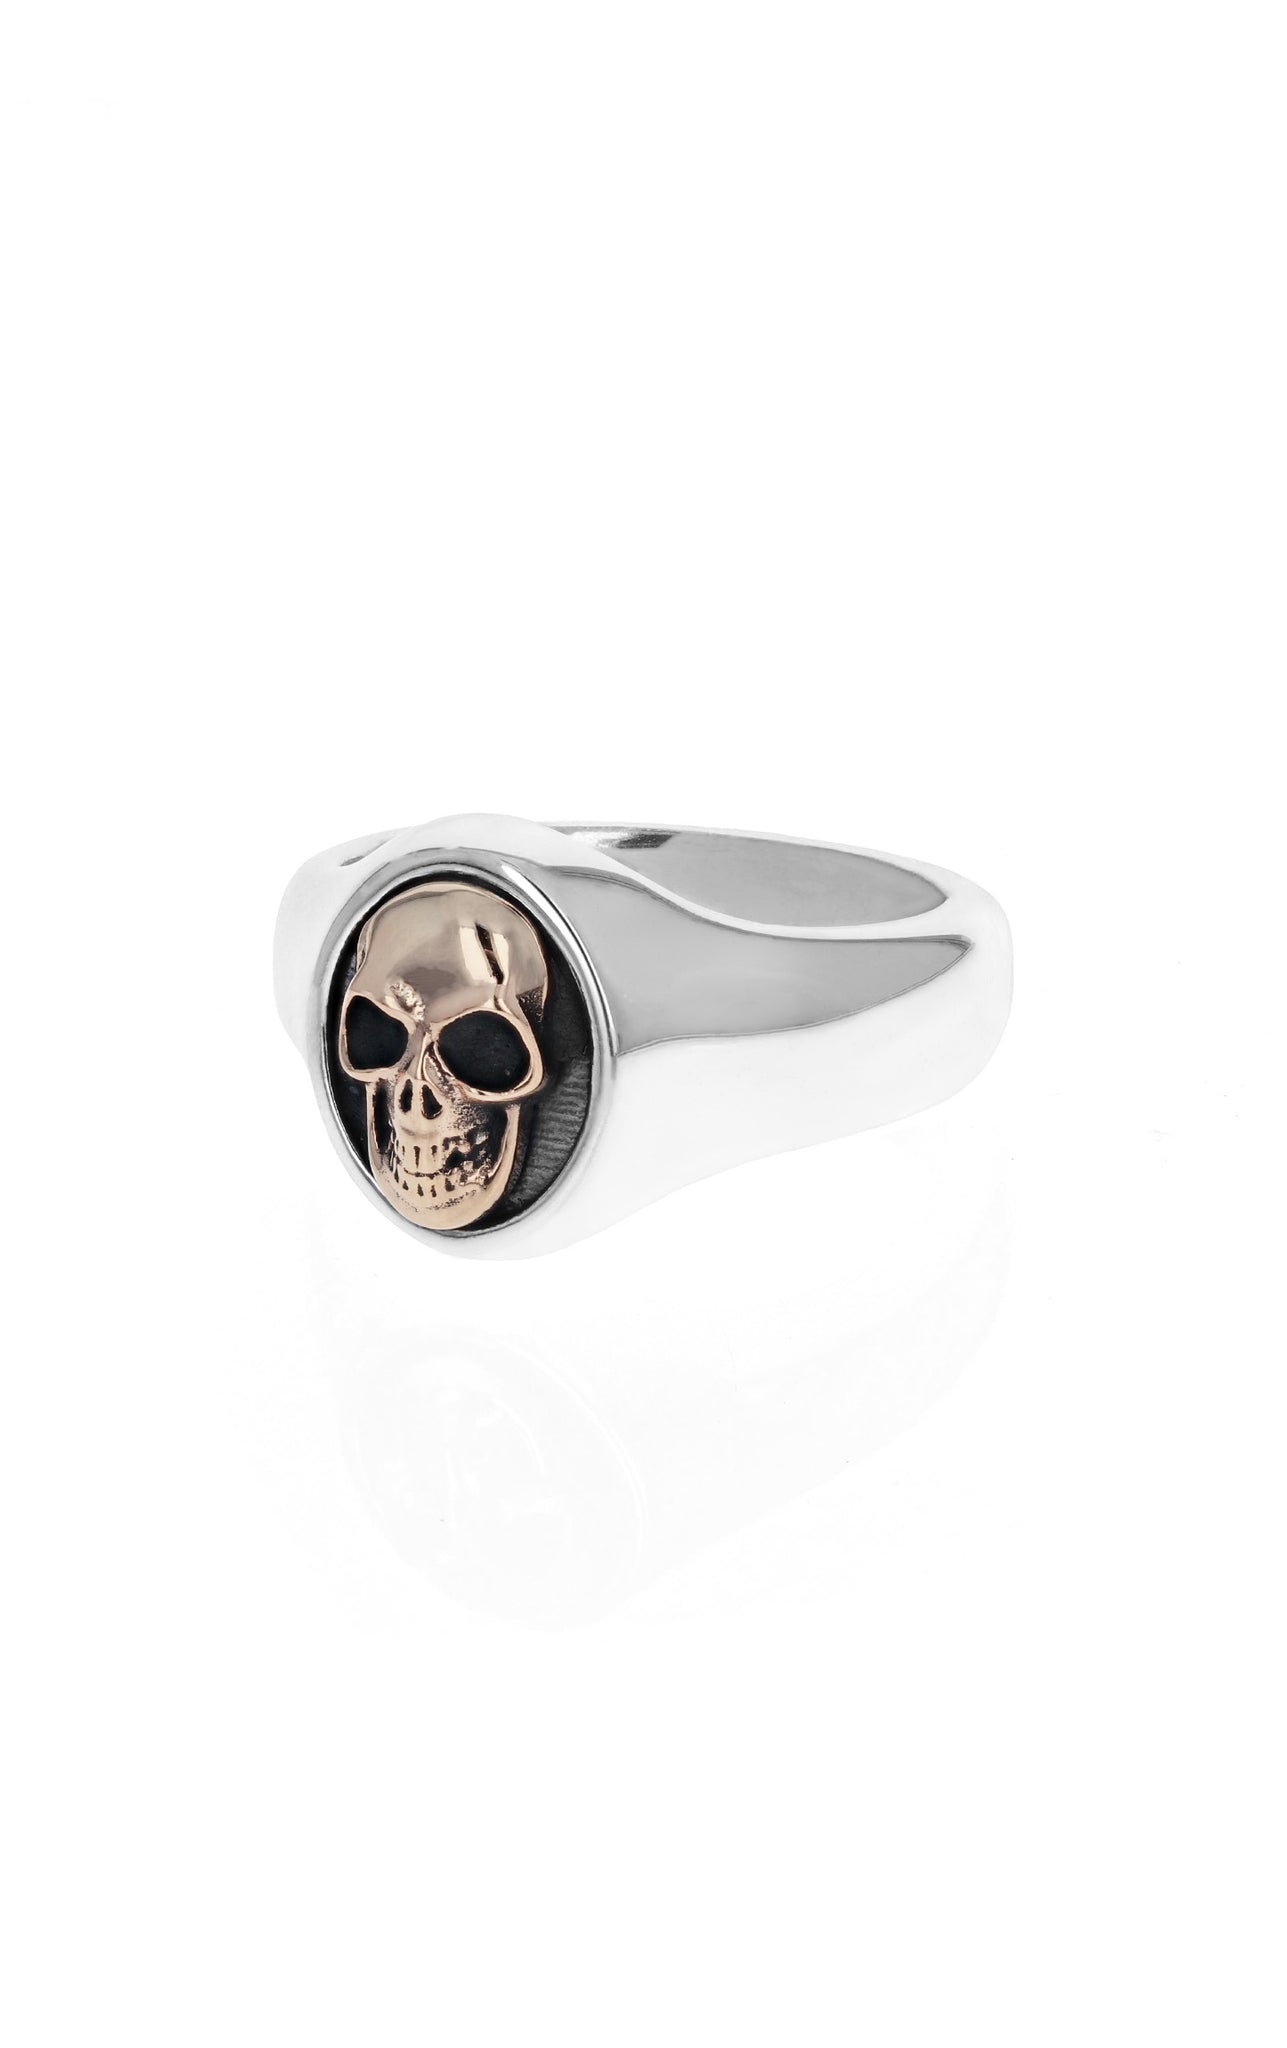 king baby small skull ring with gold alloy